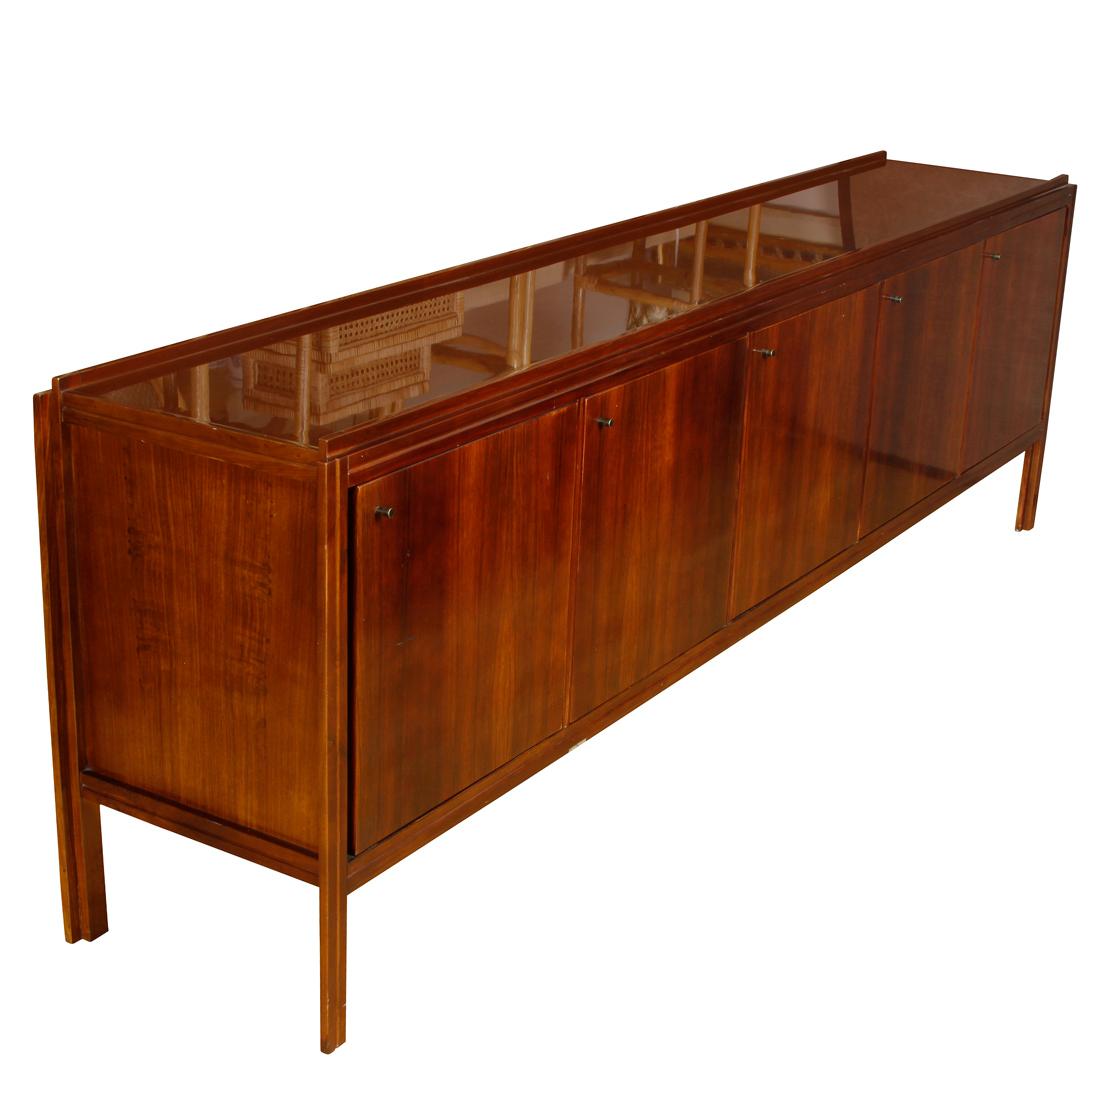 Sleek Mid-Century Modern mahogany sideboard with straight lines and five doors that each reveal a shelf inside.